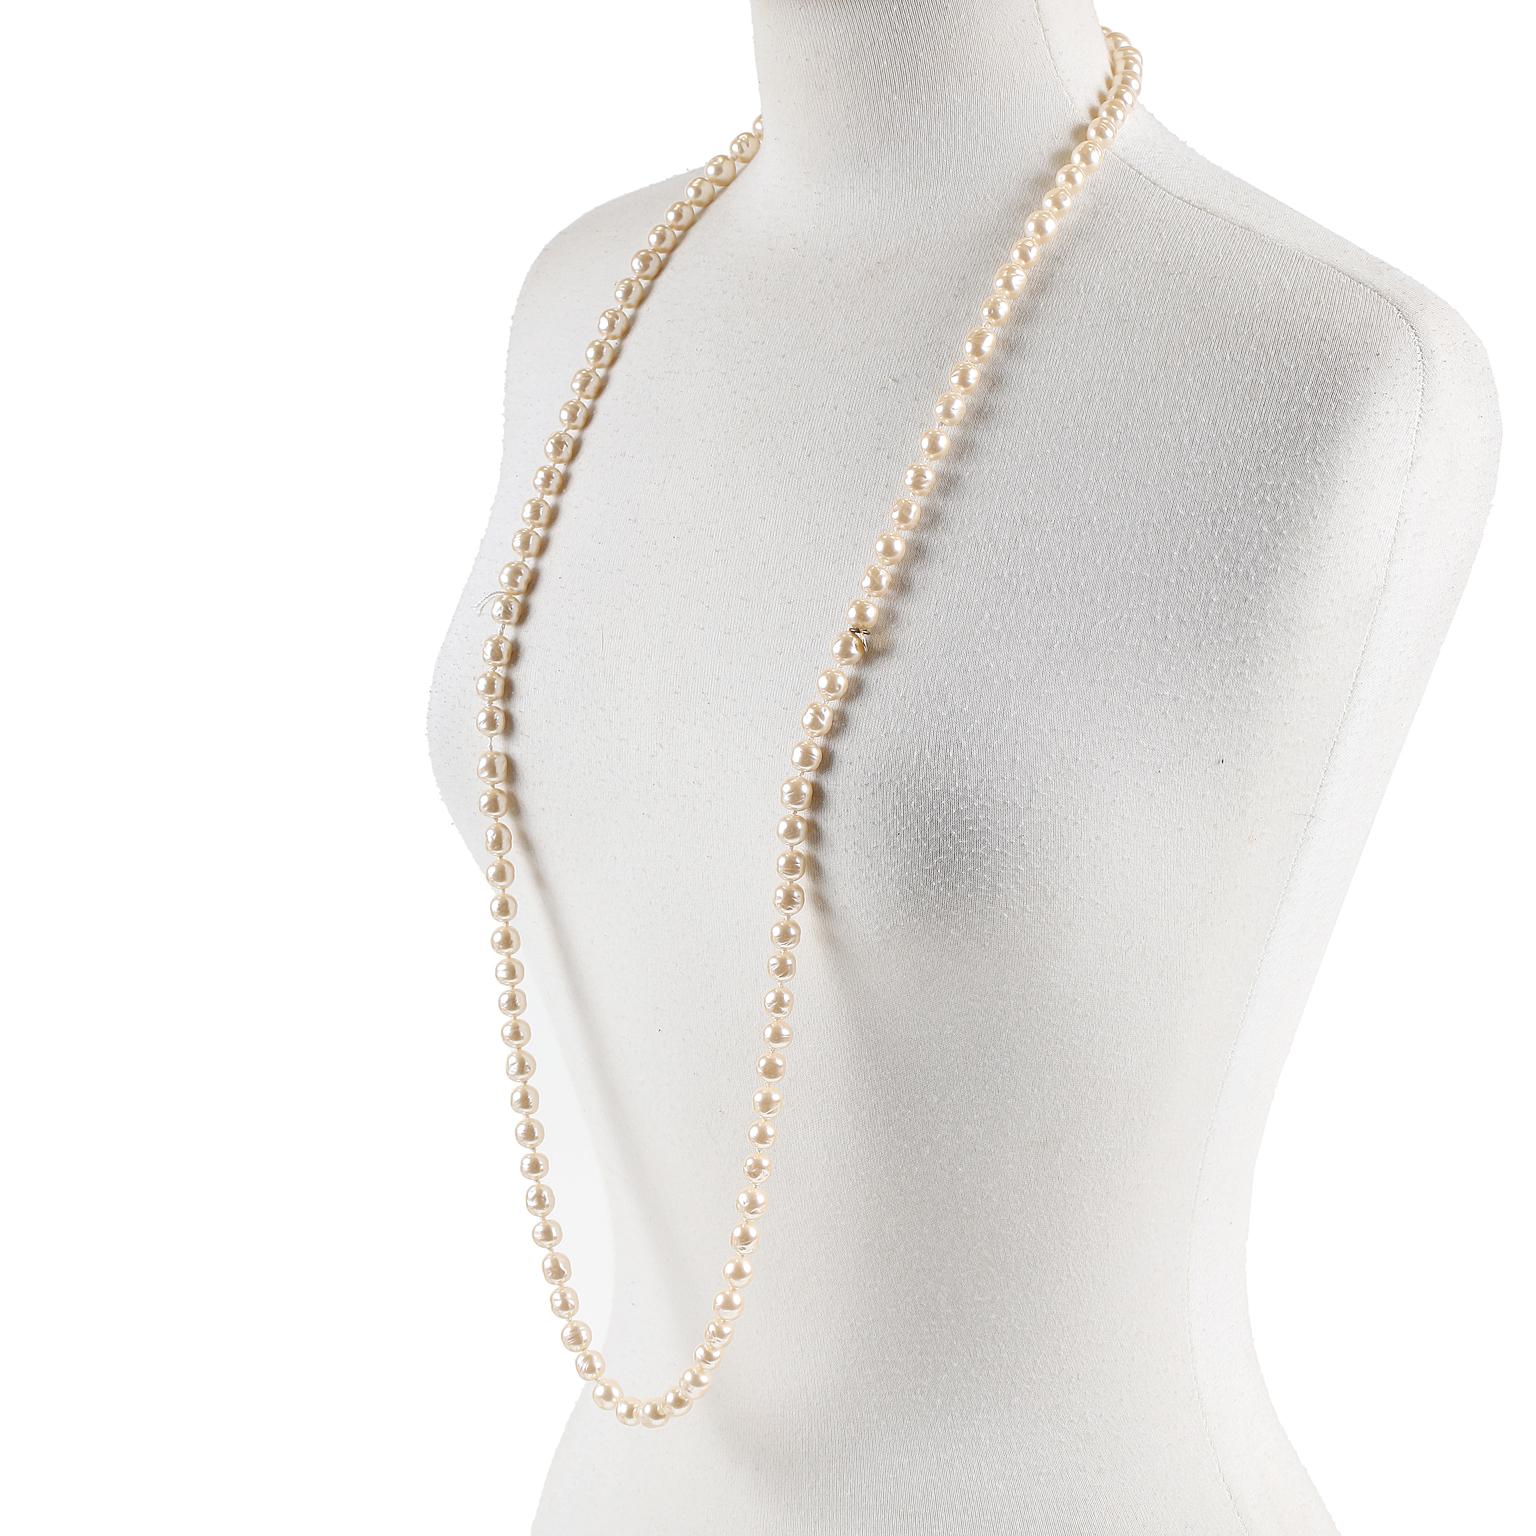 This authentic Chanel Baroque Pearl Single Strand Necklace is in mint condition.  A beautiful piece from 1981, this collectible goes with everything from t shirts to evening gowns.
Champagne colored large baroque pearls.  Long length, 36” total. 